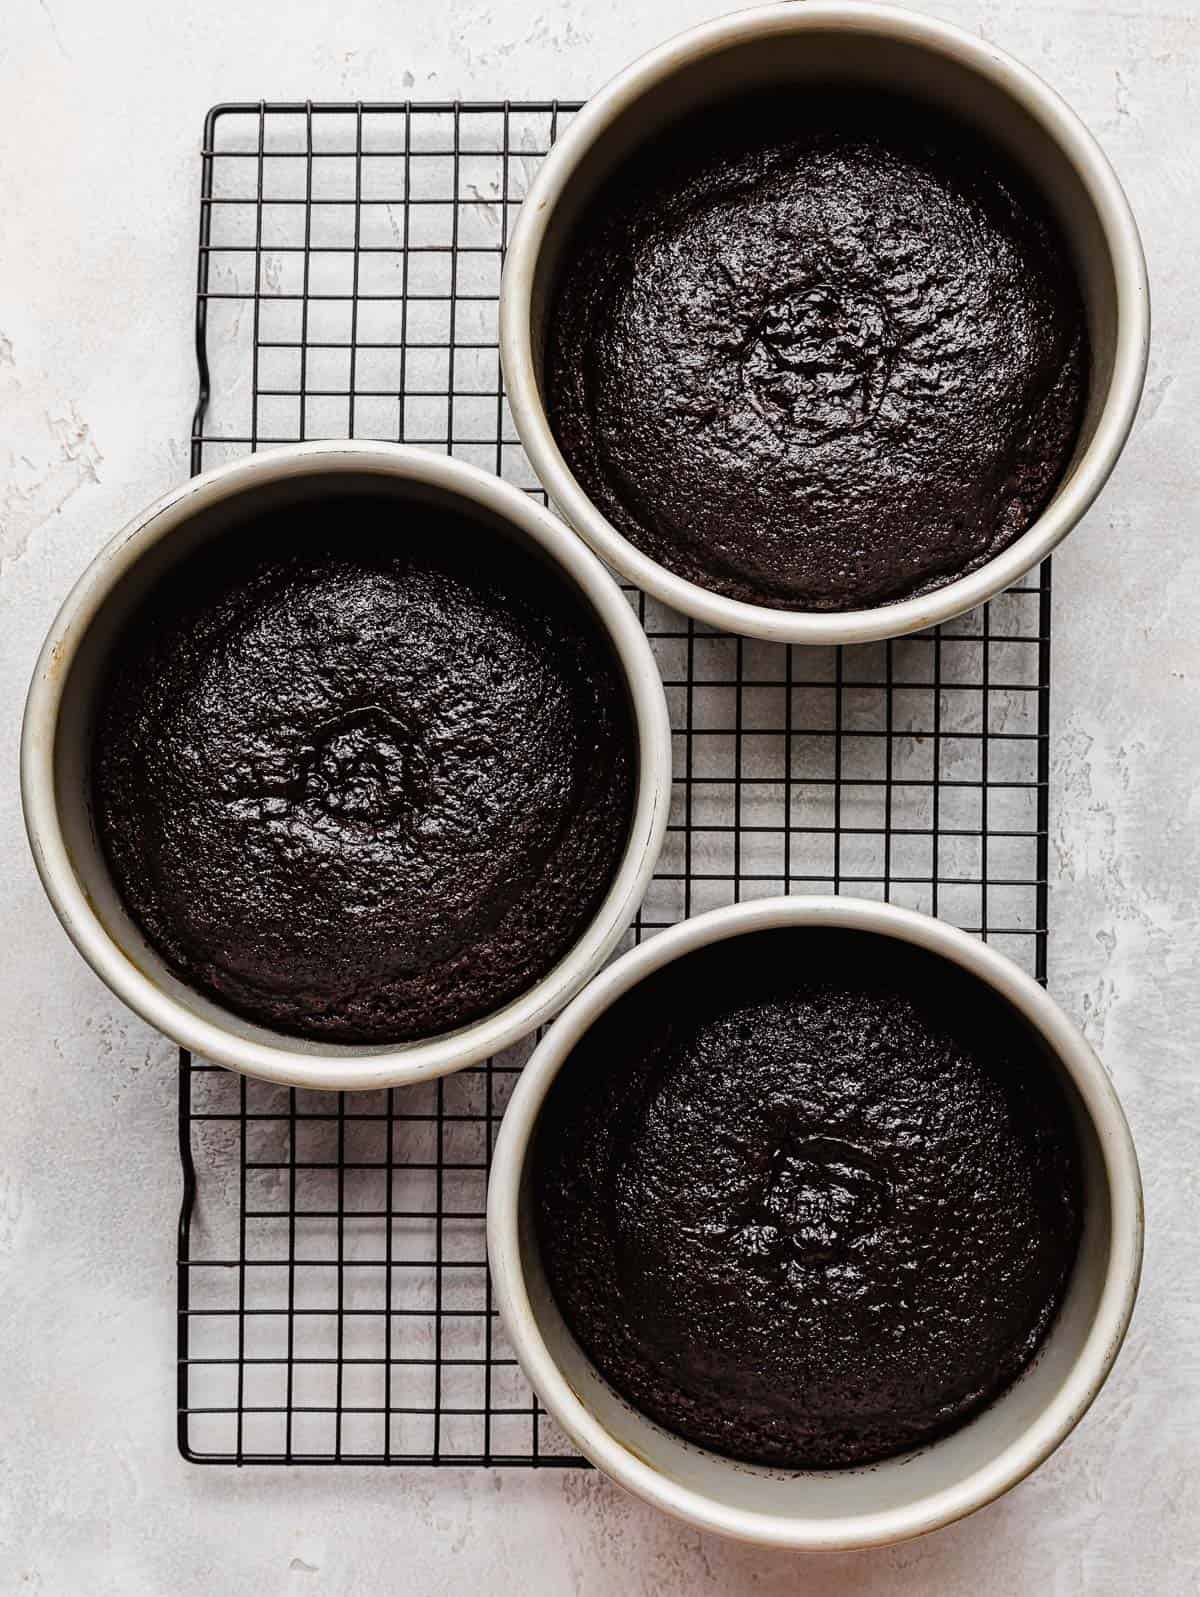 Three six inch round cake pans with baked German chcoolate cake layers in each pan on a wire rack.